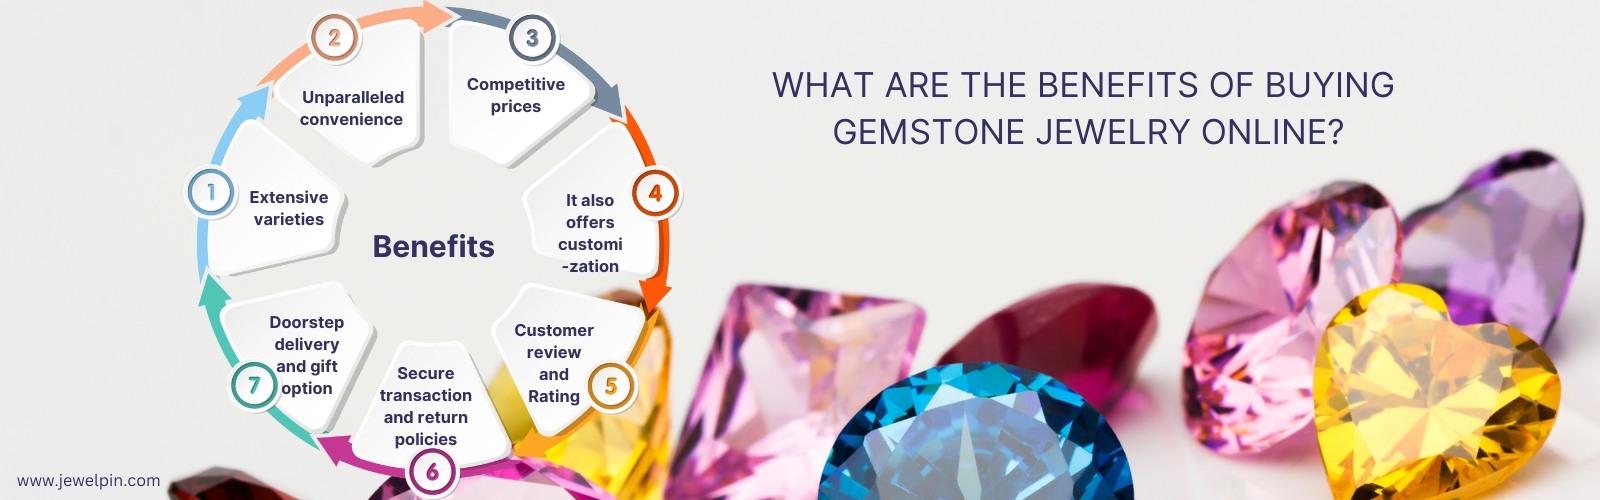 what is the benefit of buying gemstone jewelry online